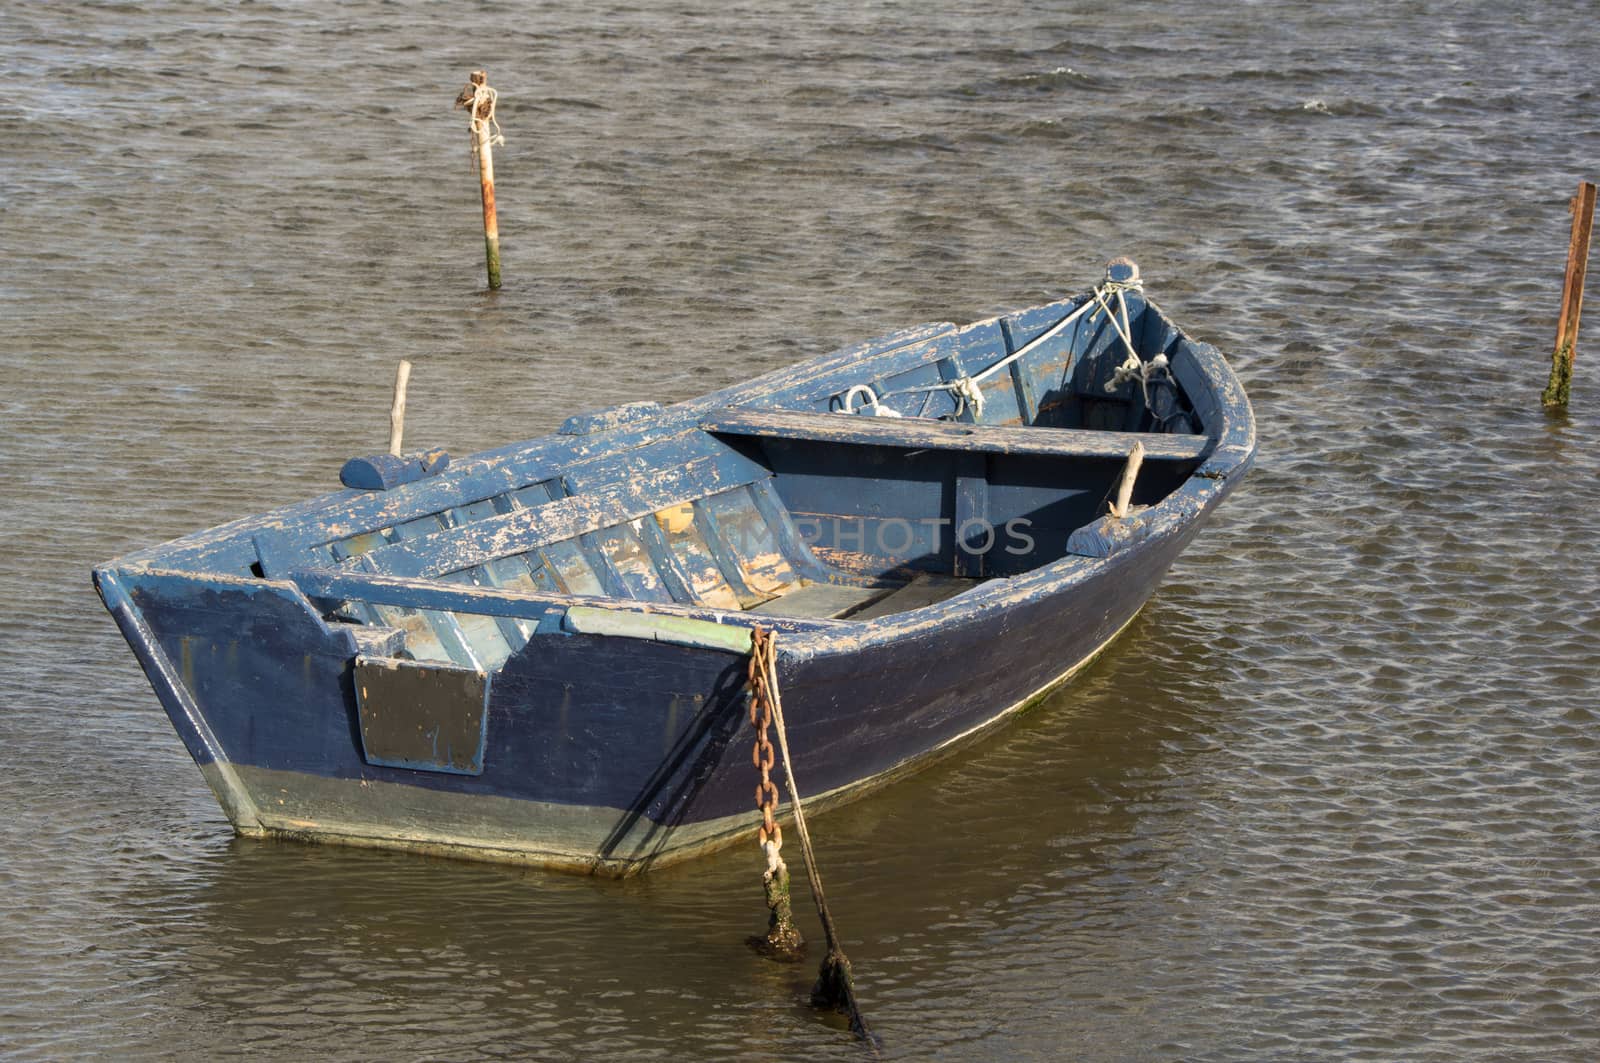 Fishing boat anchored in the pond